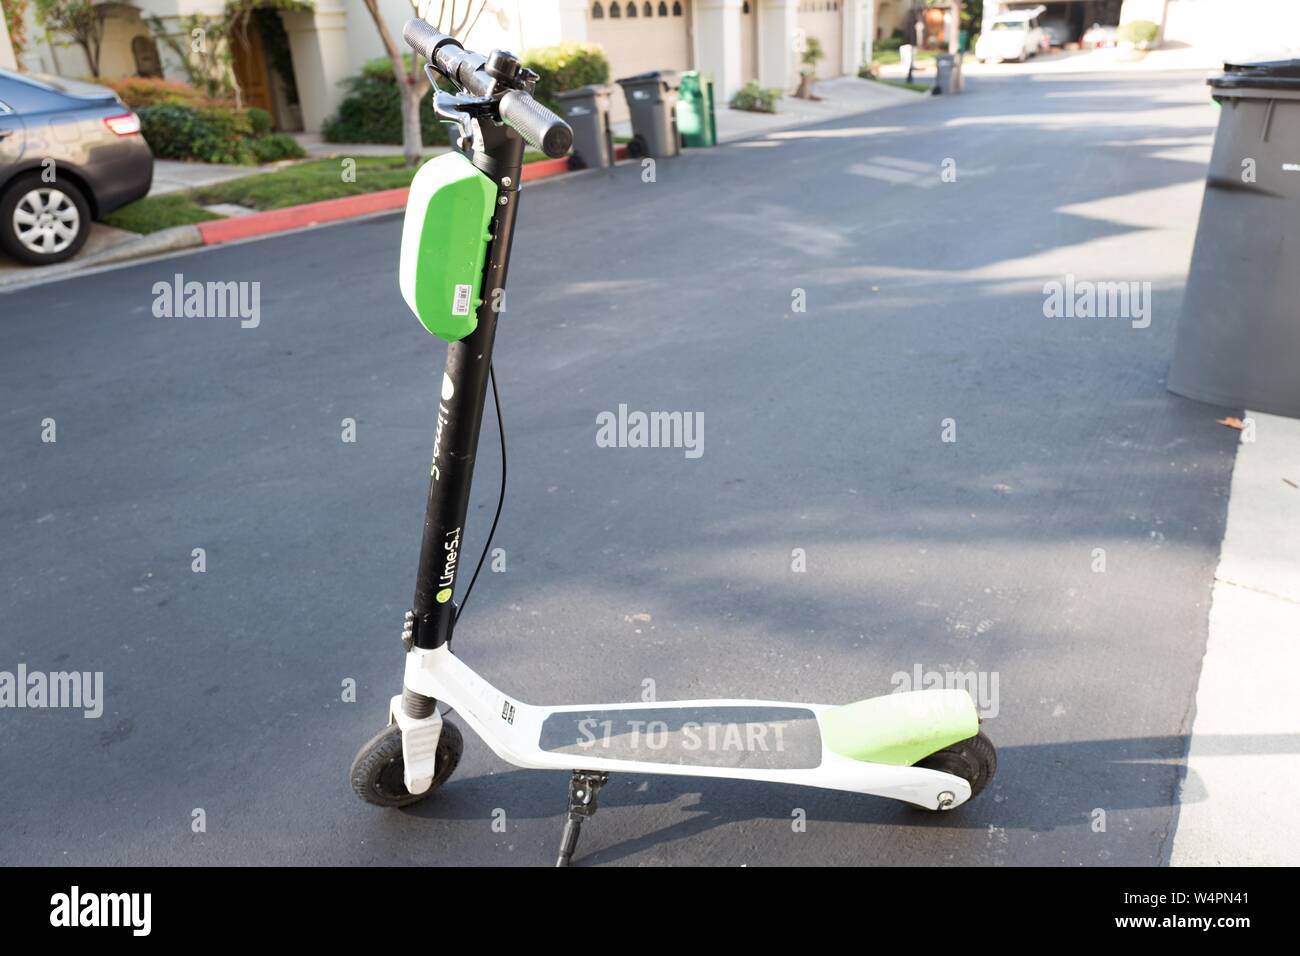 Full length view of Lime dockless electric scooter in San Ramon, California parked on an asphalt road surface, October 18, 2018. () Stock Photo